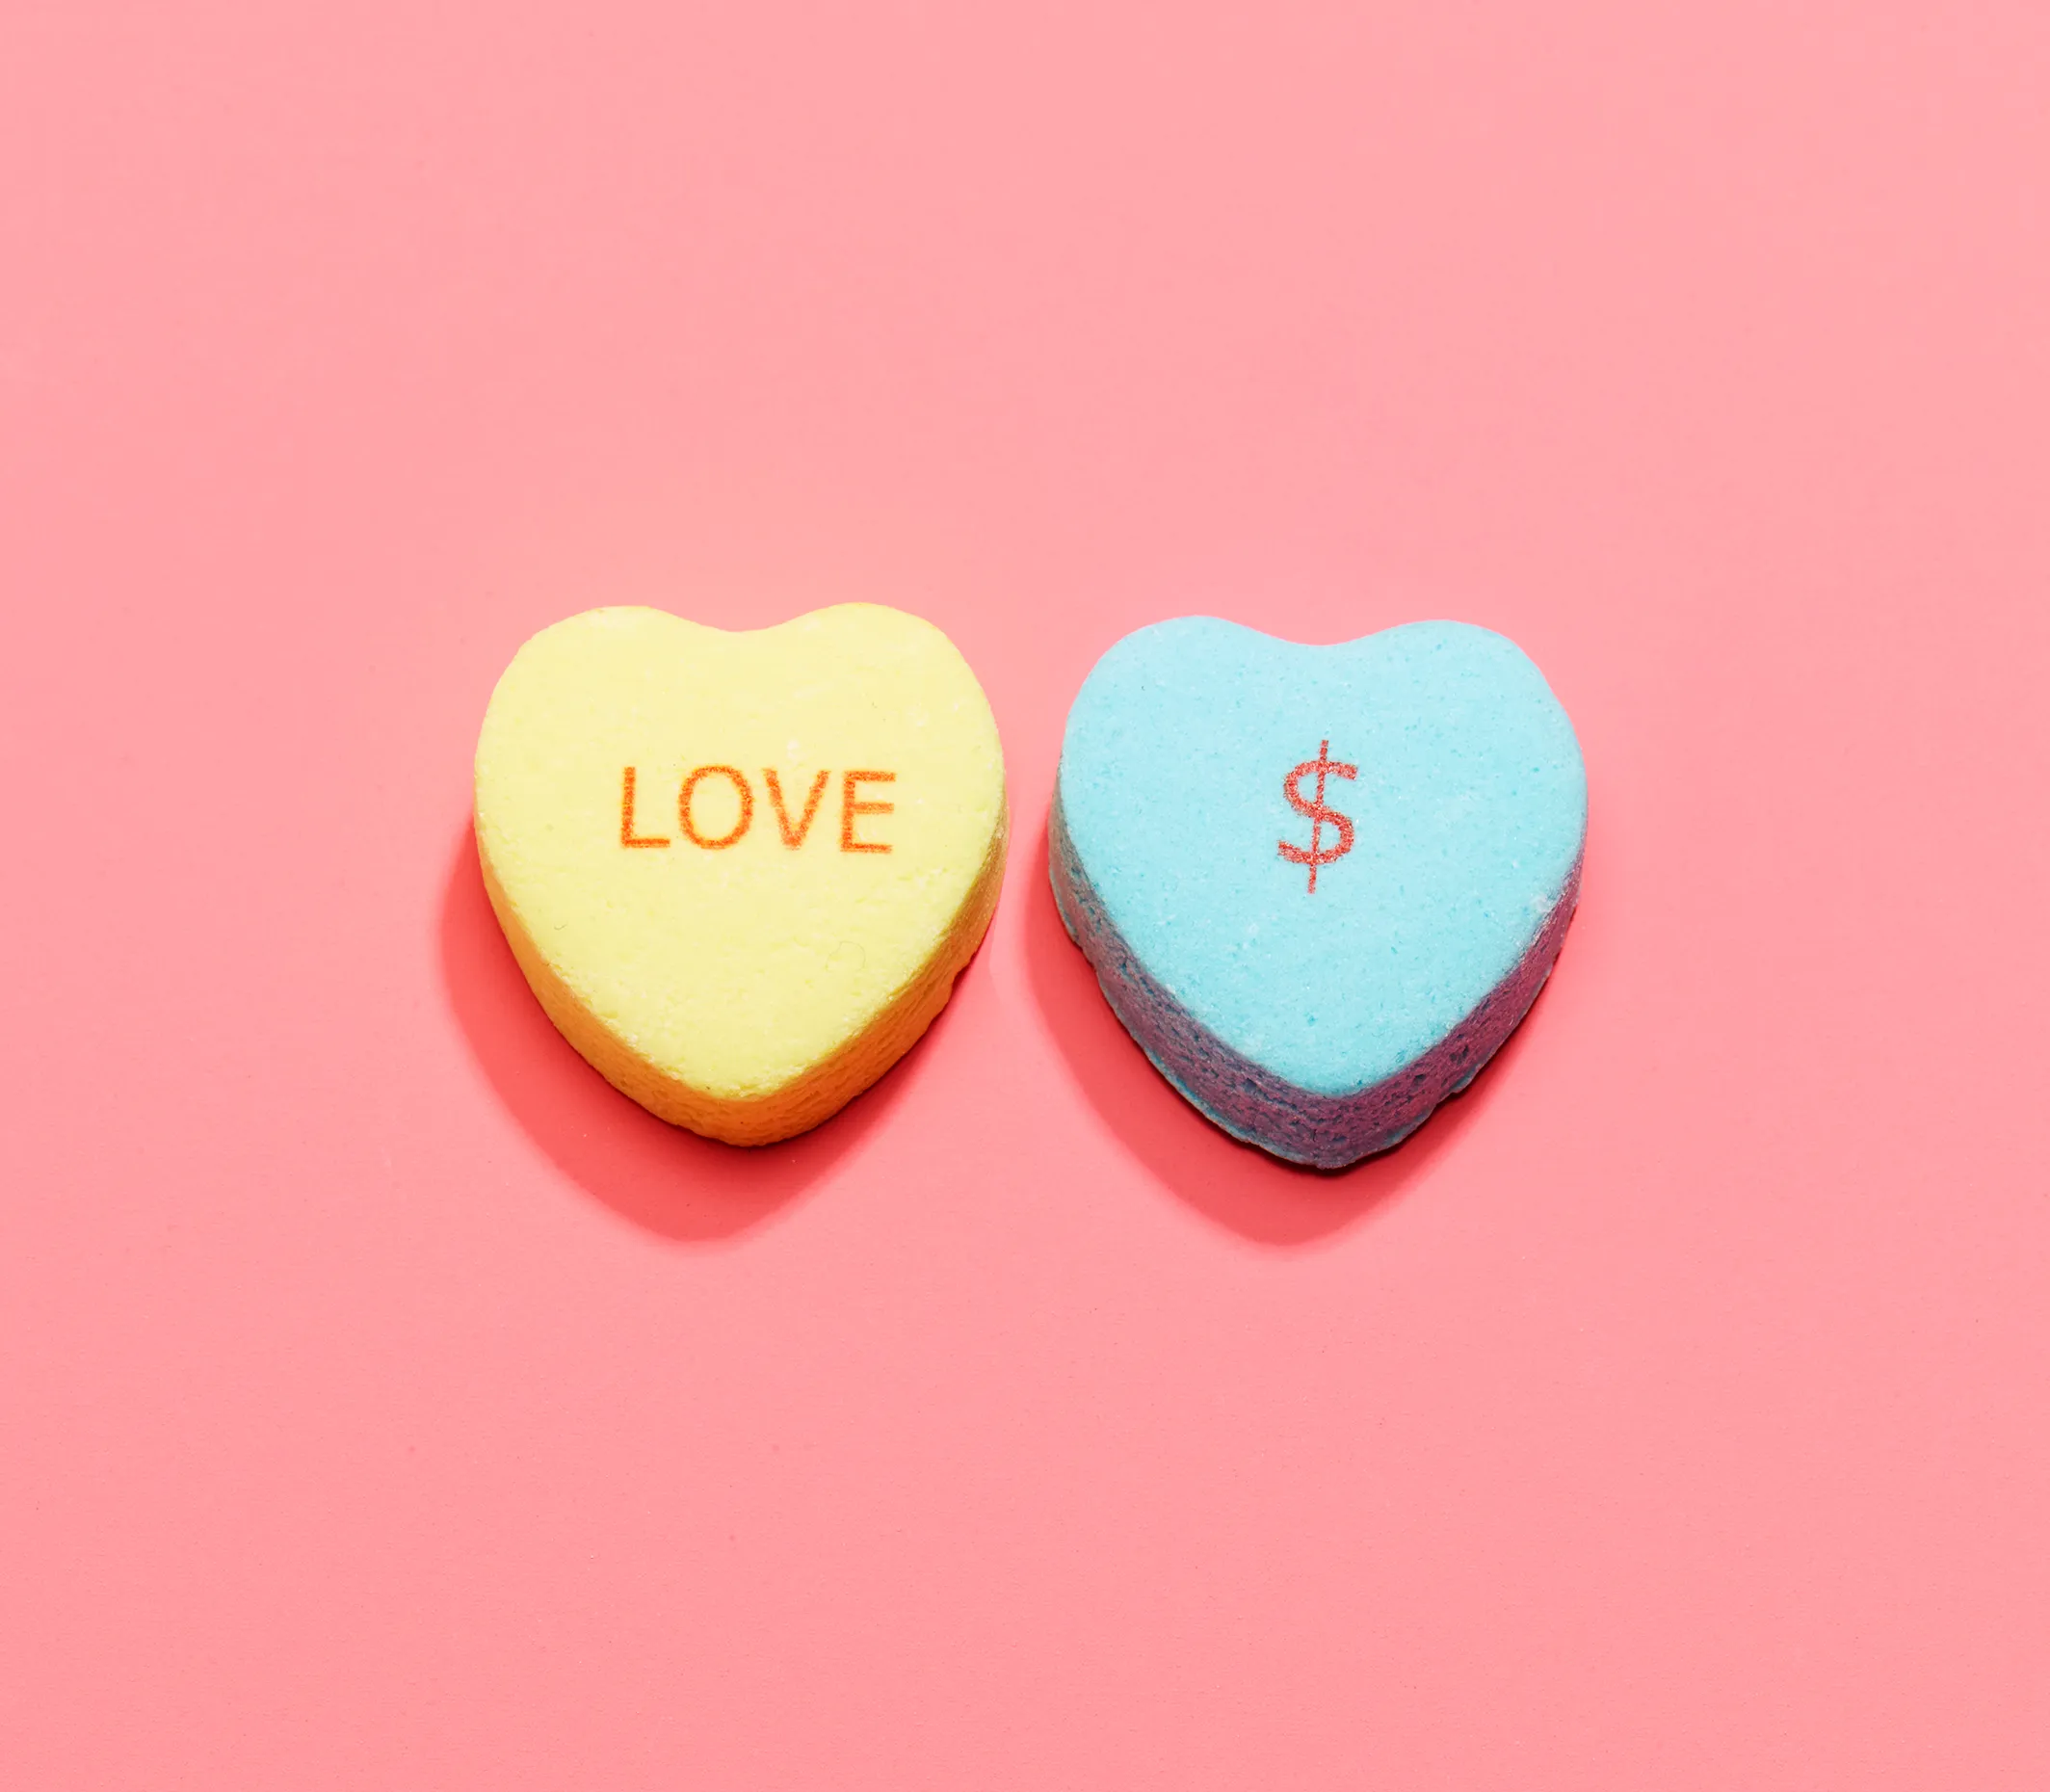 Love and money survey shows big changes in how couples manage finances Money pic